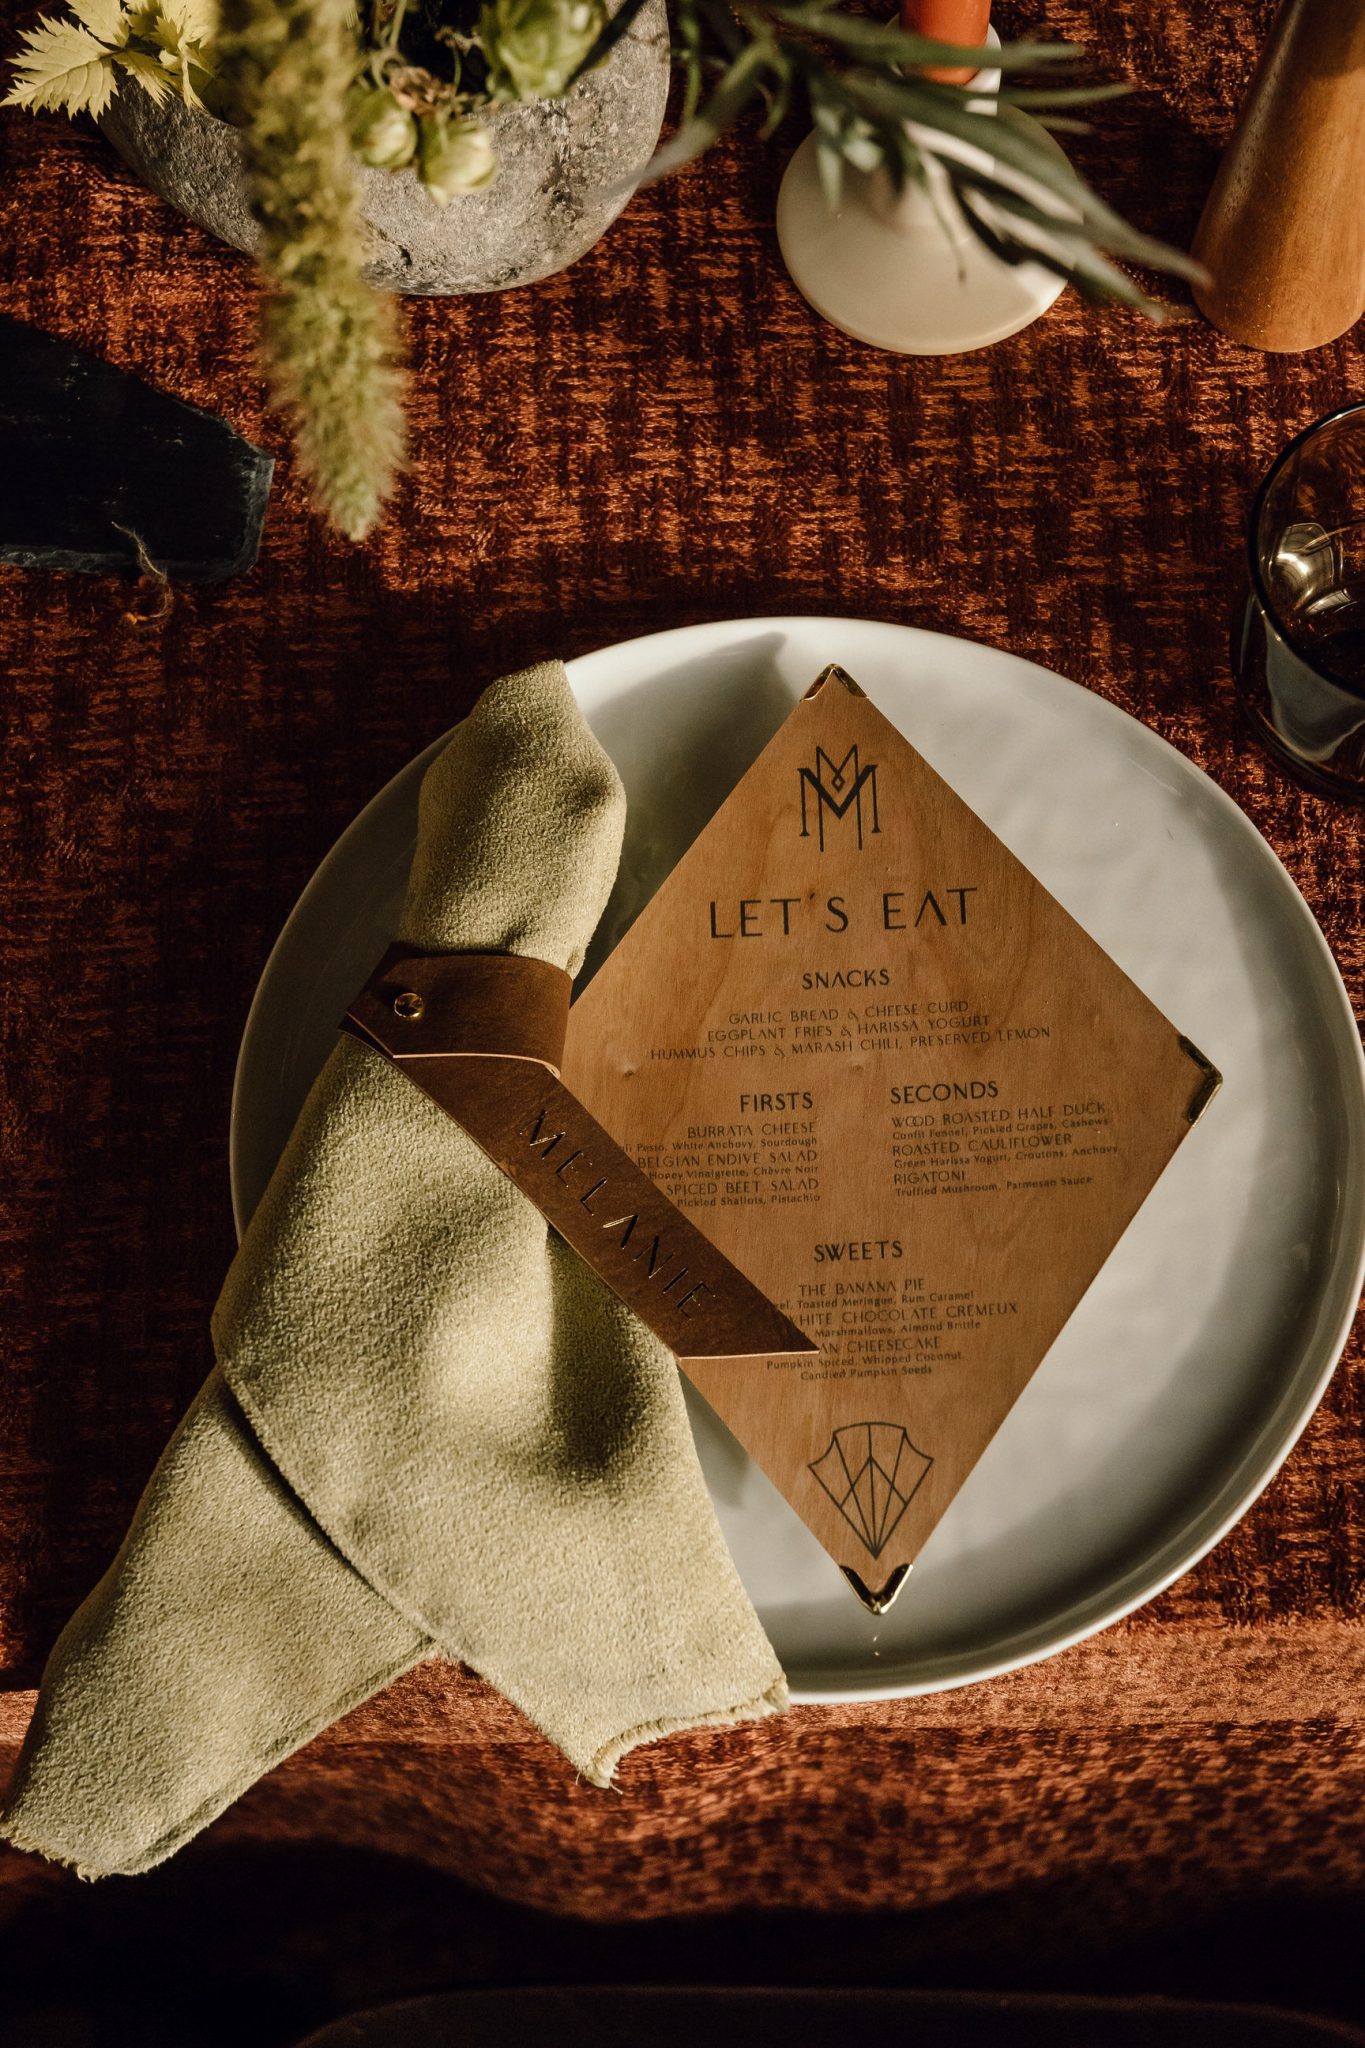 Wood and leather inspired wedding menus